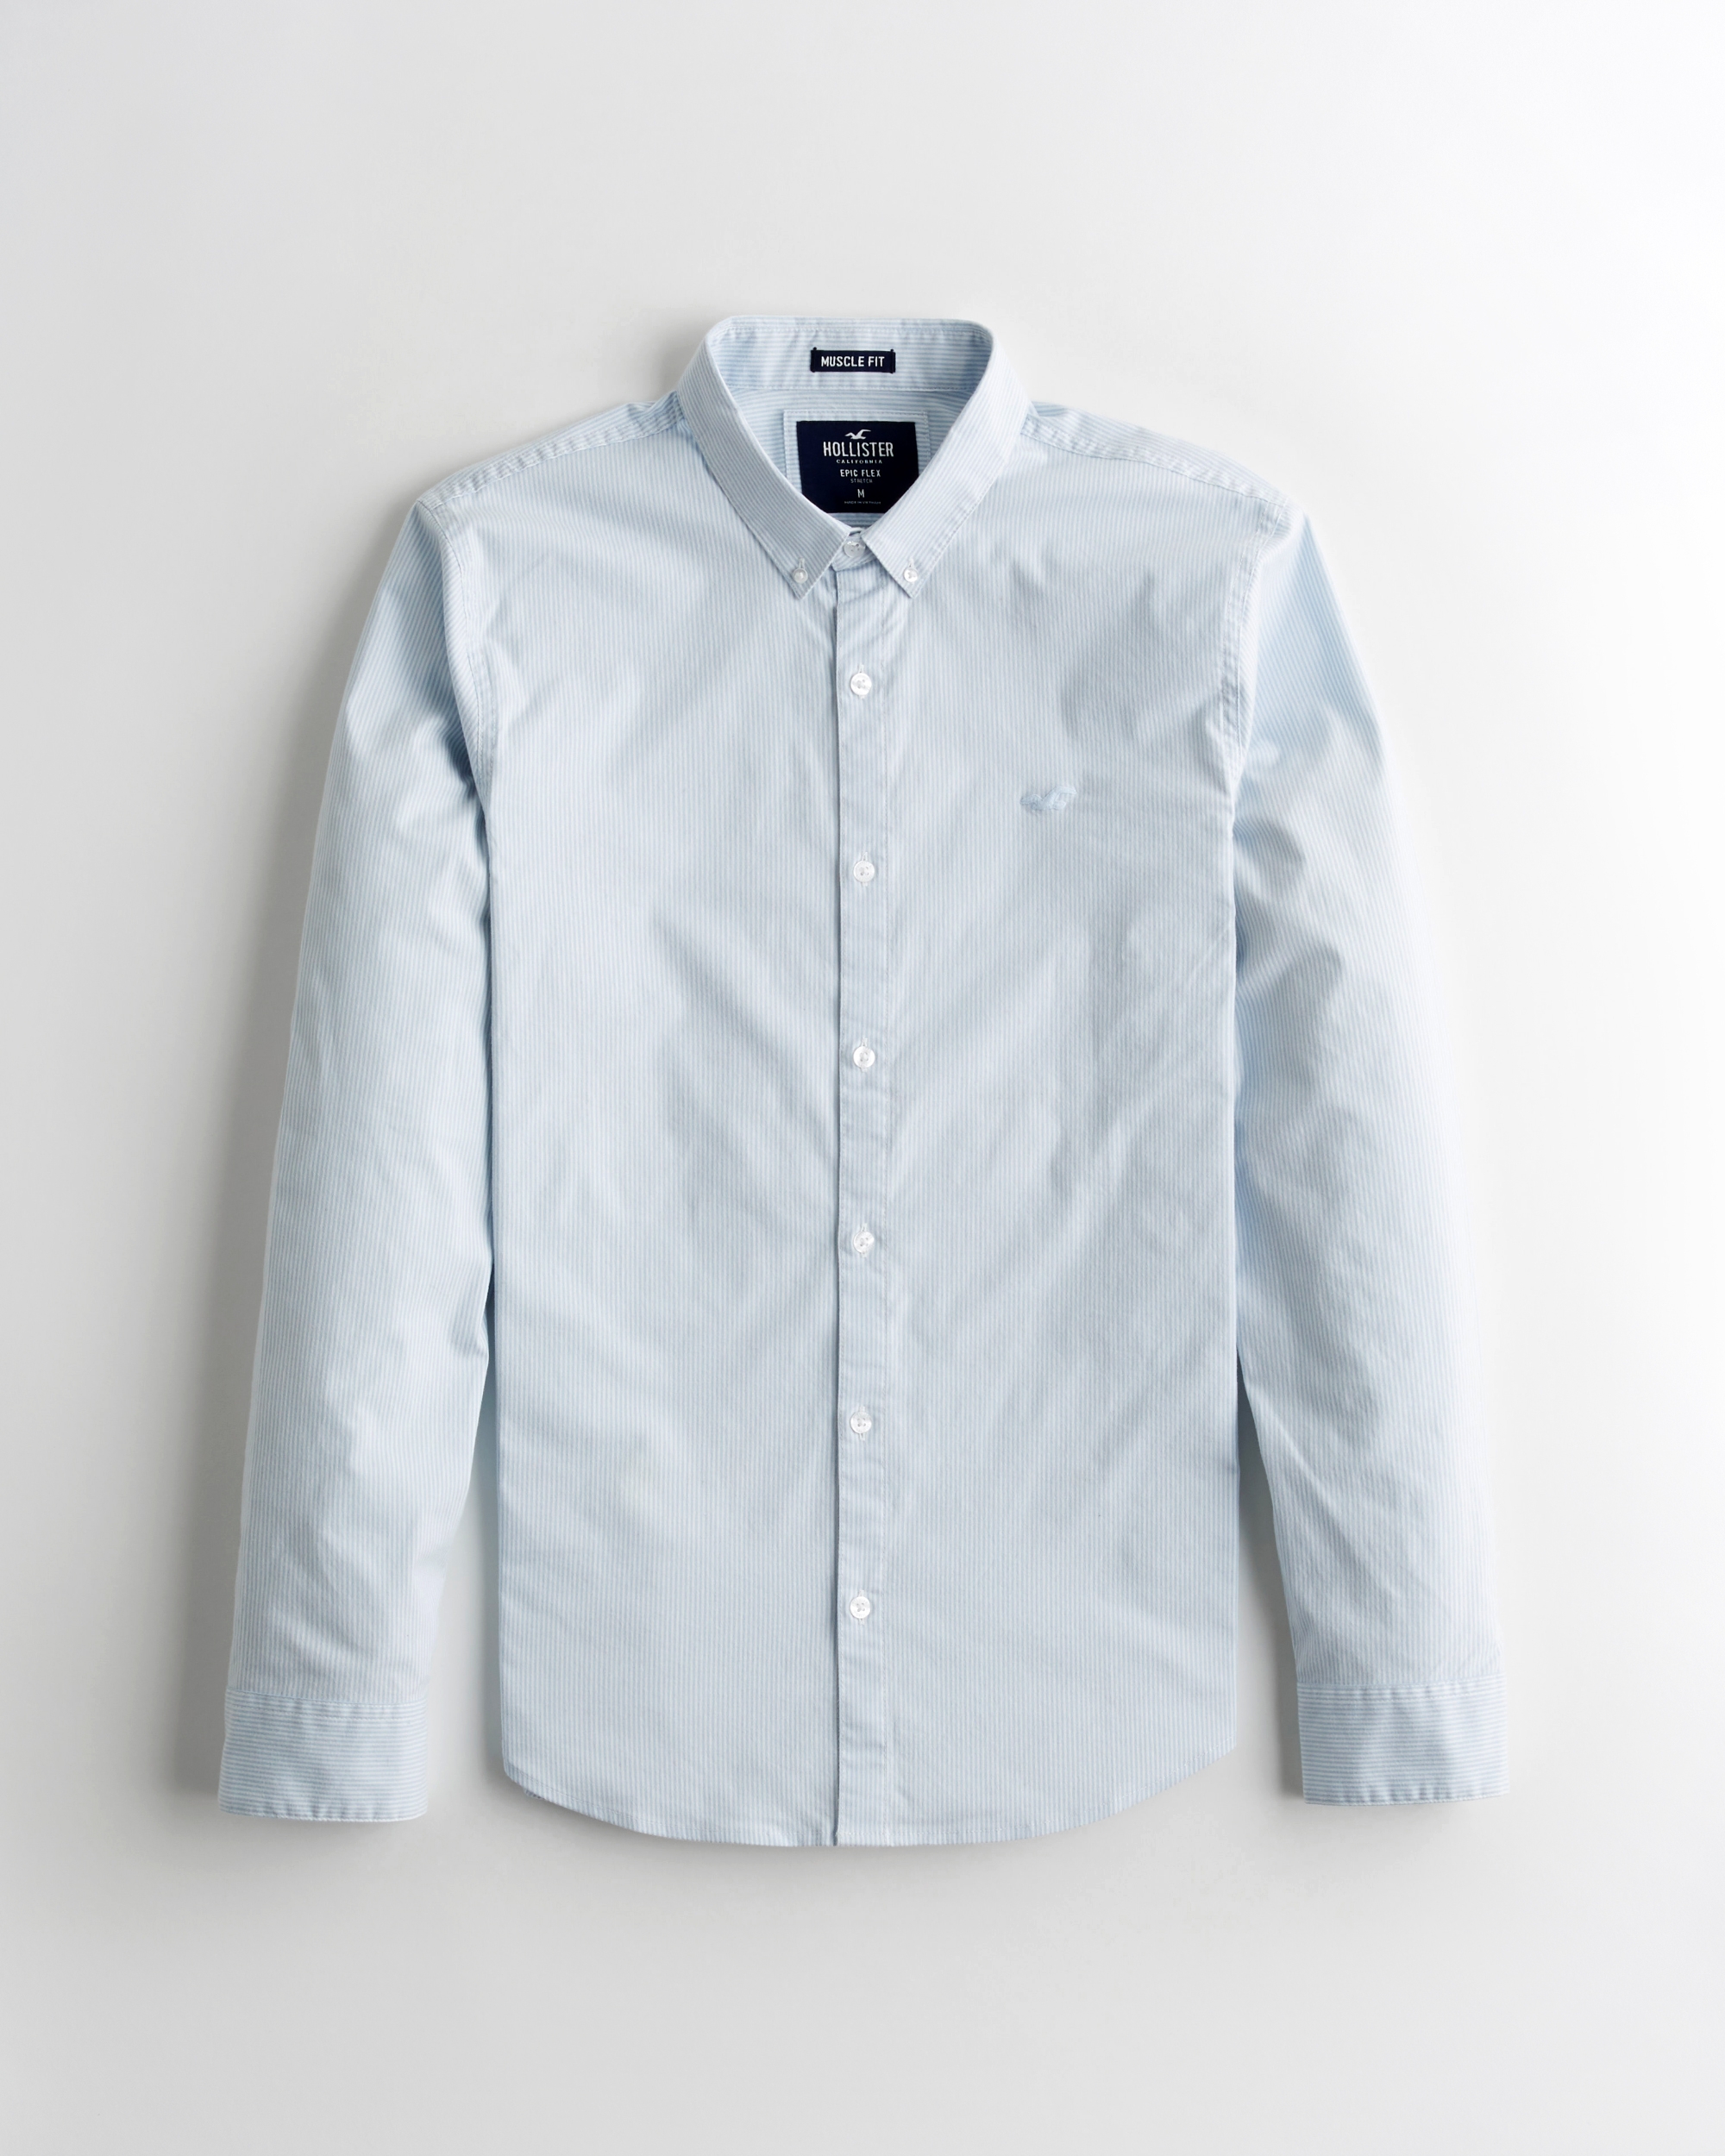 hollister stretch oxford muscle fit shirt